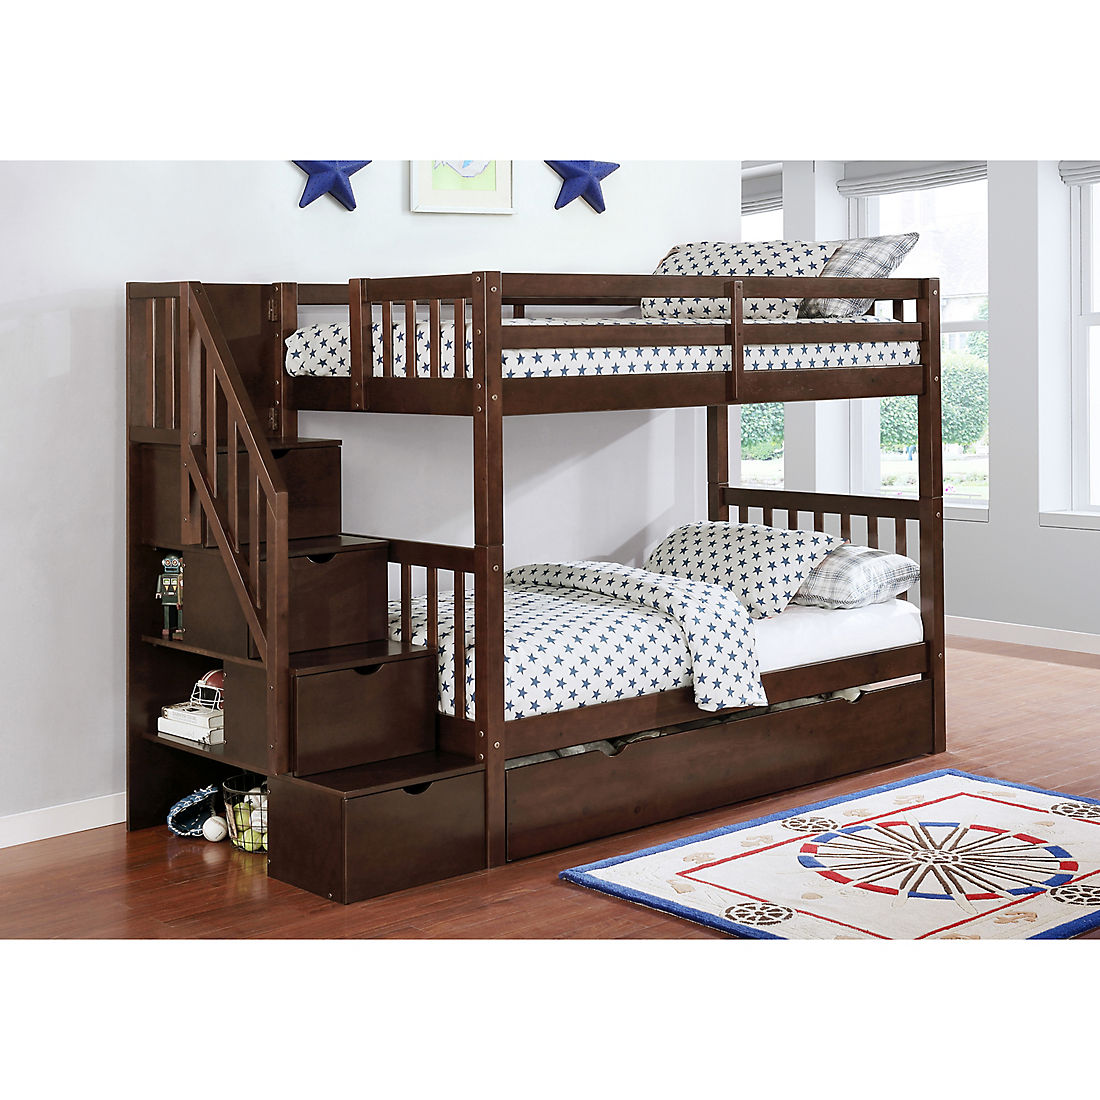 Berkley Jensen Twin Over Stairway, How To Put A Bunk Bed Together